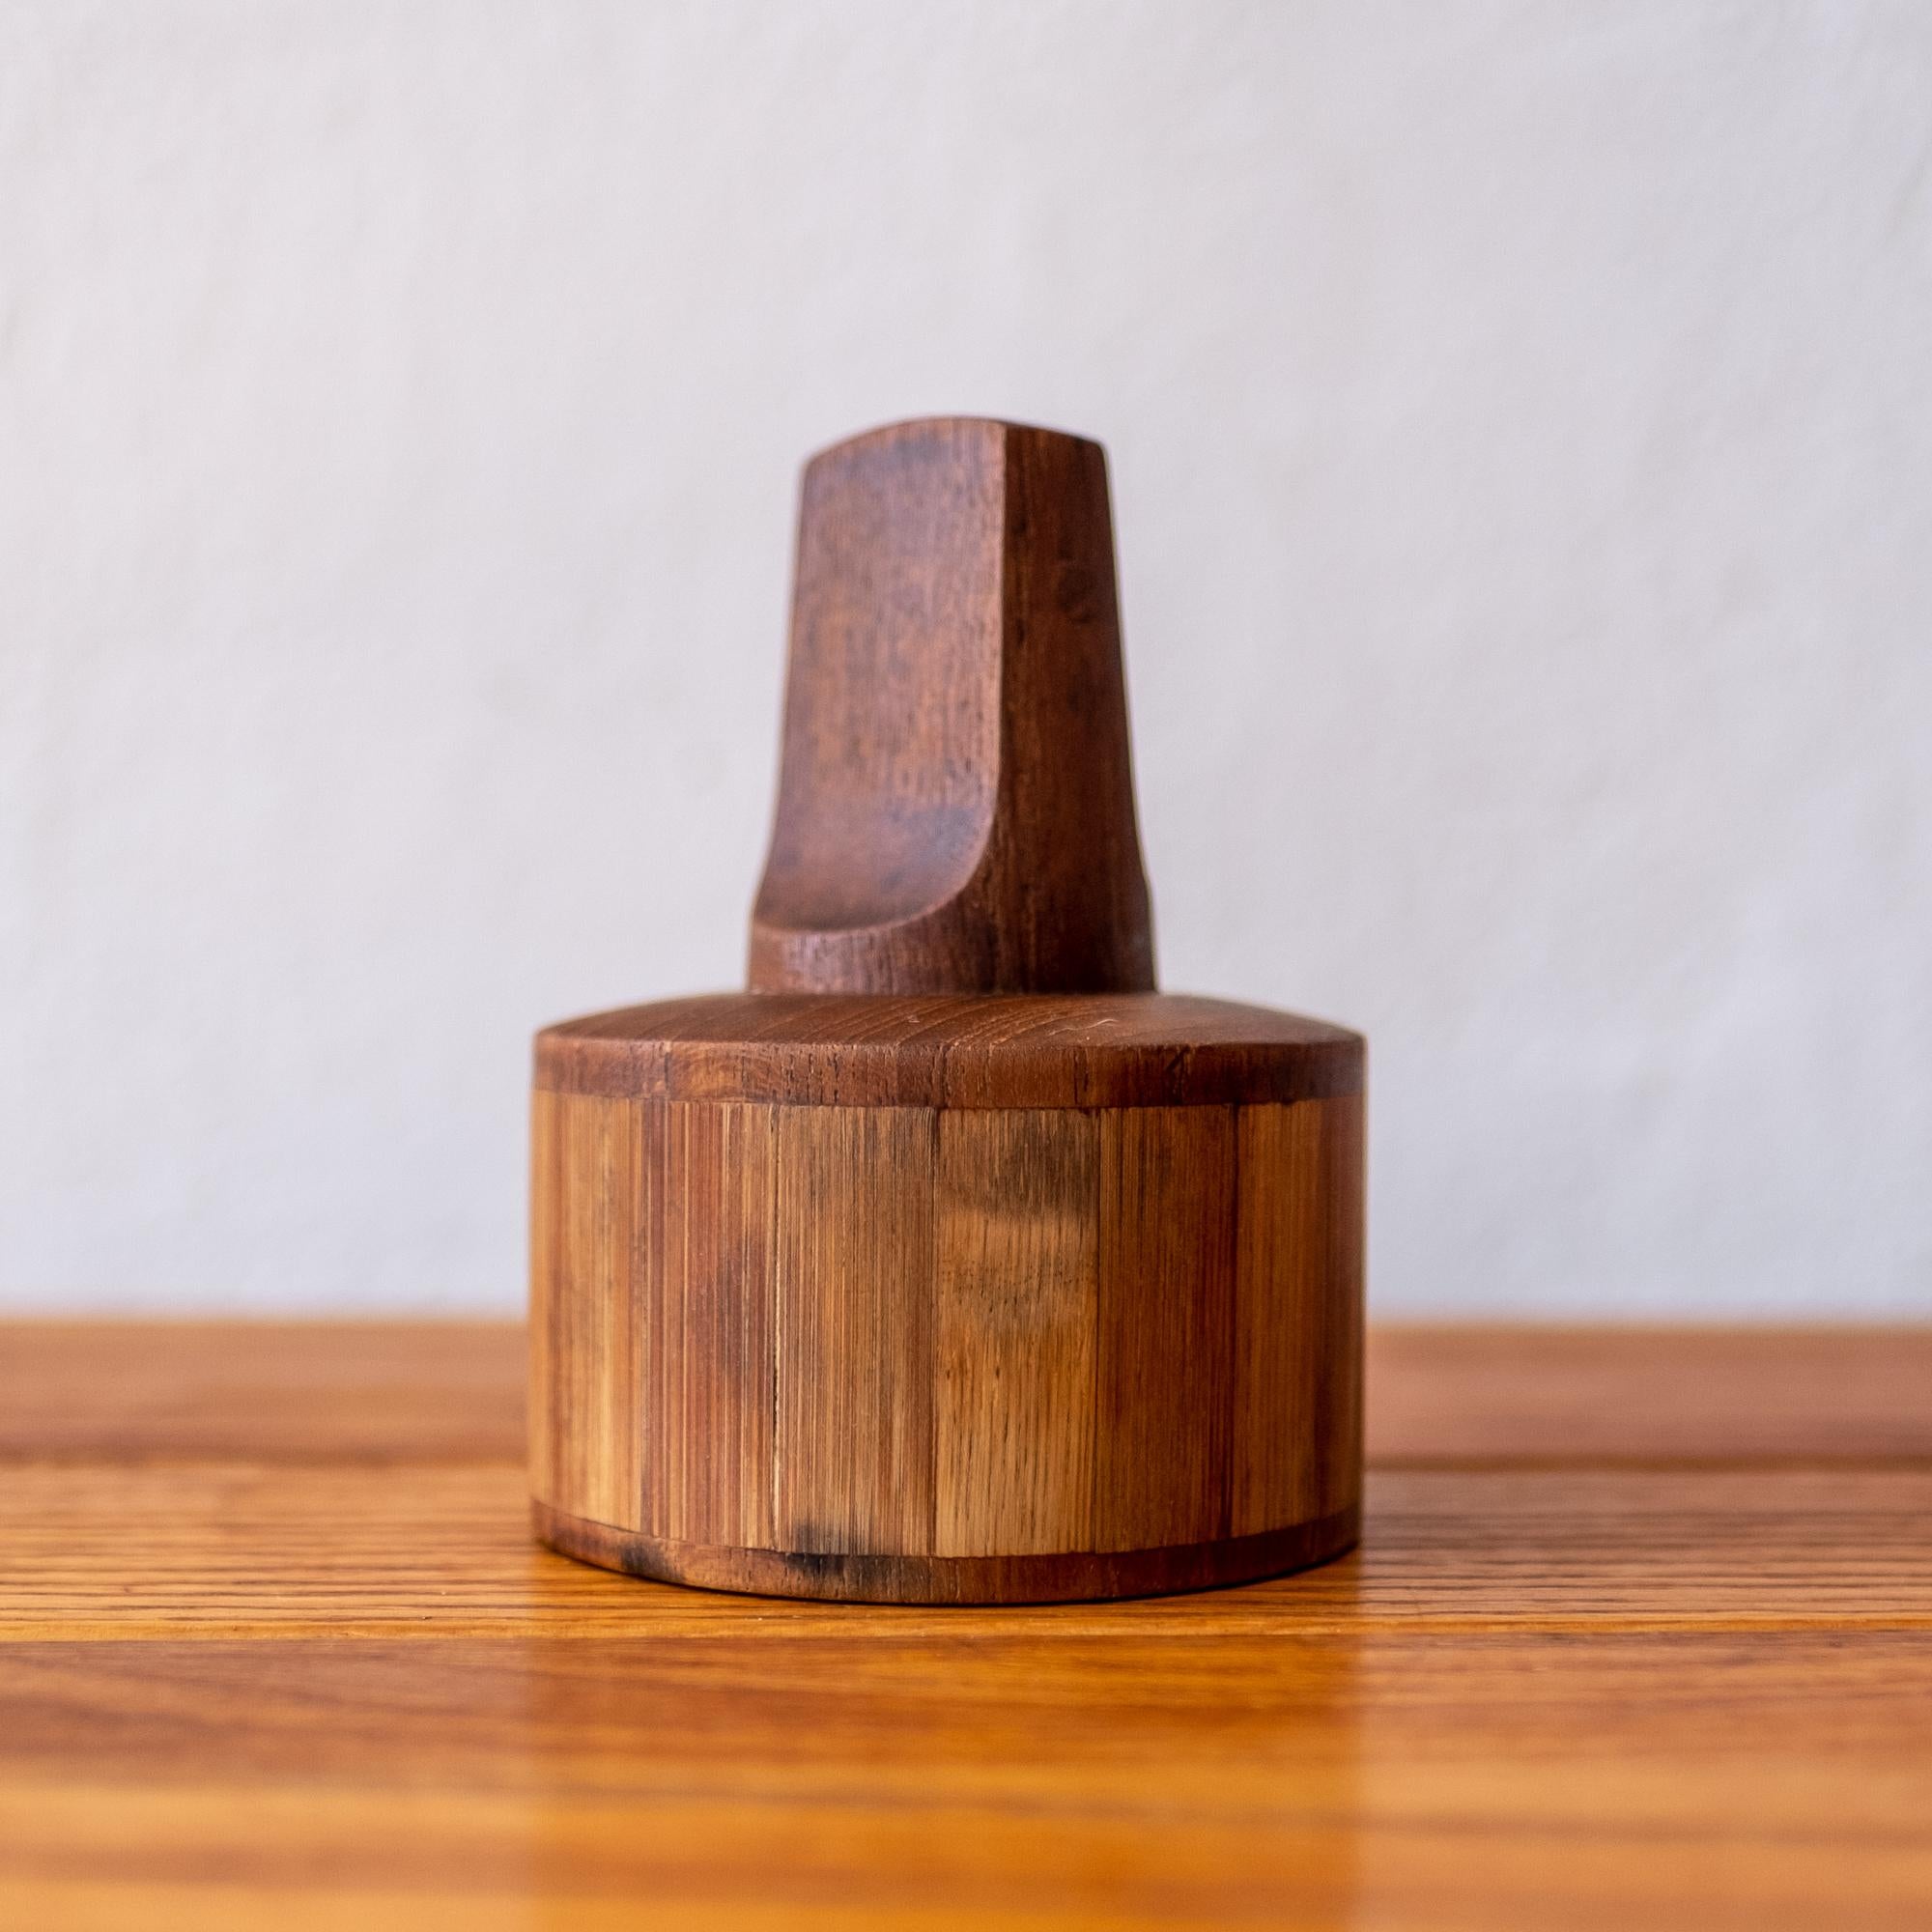 Rare and early pepper mill by Jens Quistgaard in teak and split bamboo. It has the earliest grinding mechanism, which was produced in France. The mill was produced by Dansk in Denmark, circa 1960s. Also included is a butcher block, also designed by